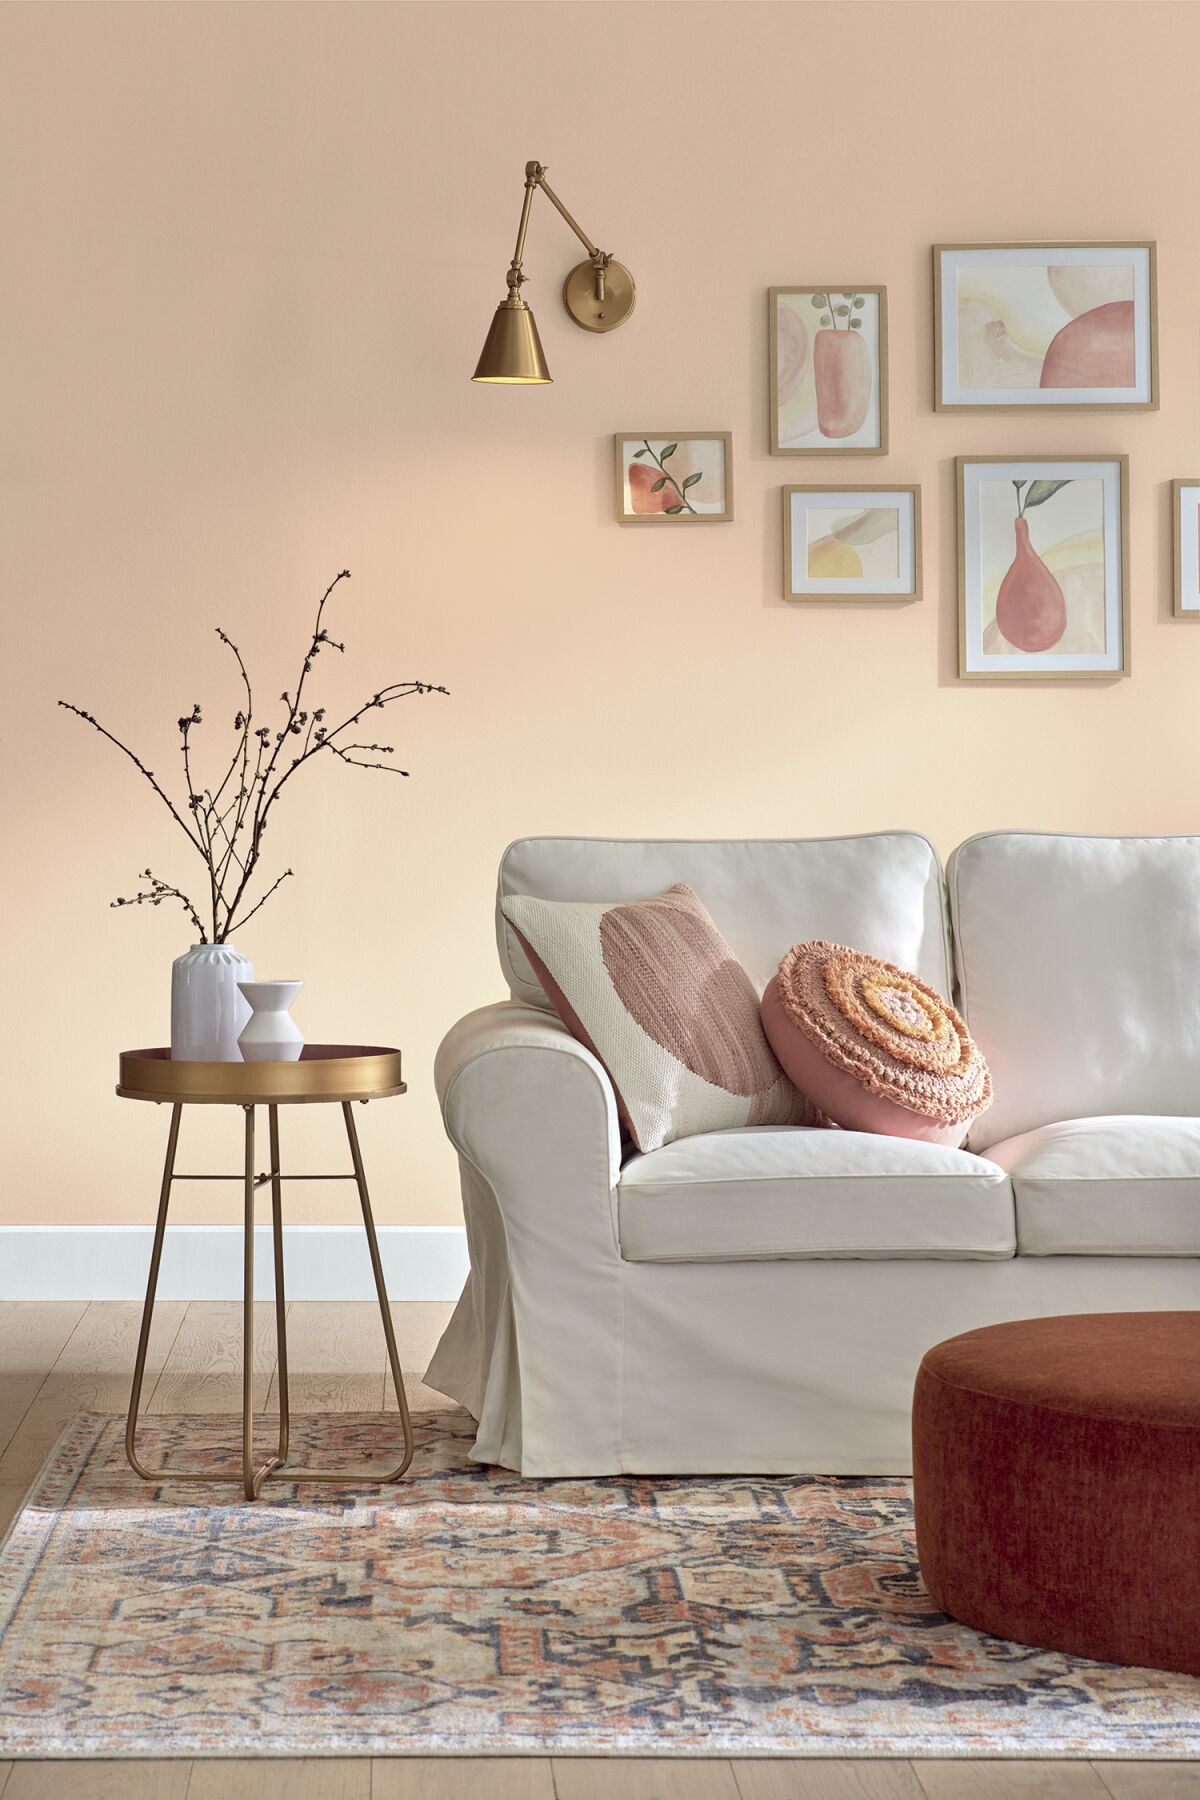 Sunset Curtains is the Valspar 2022 Color of the Year chosen as the best for Aries.